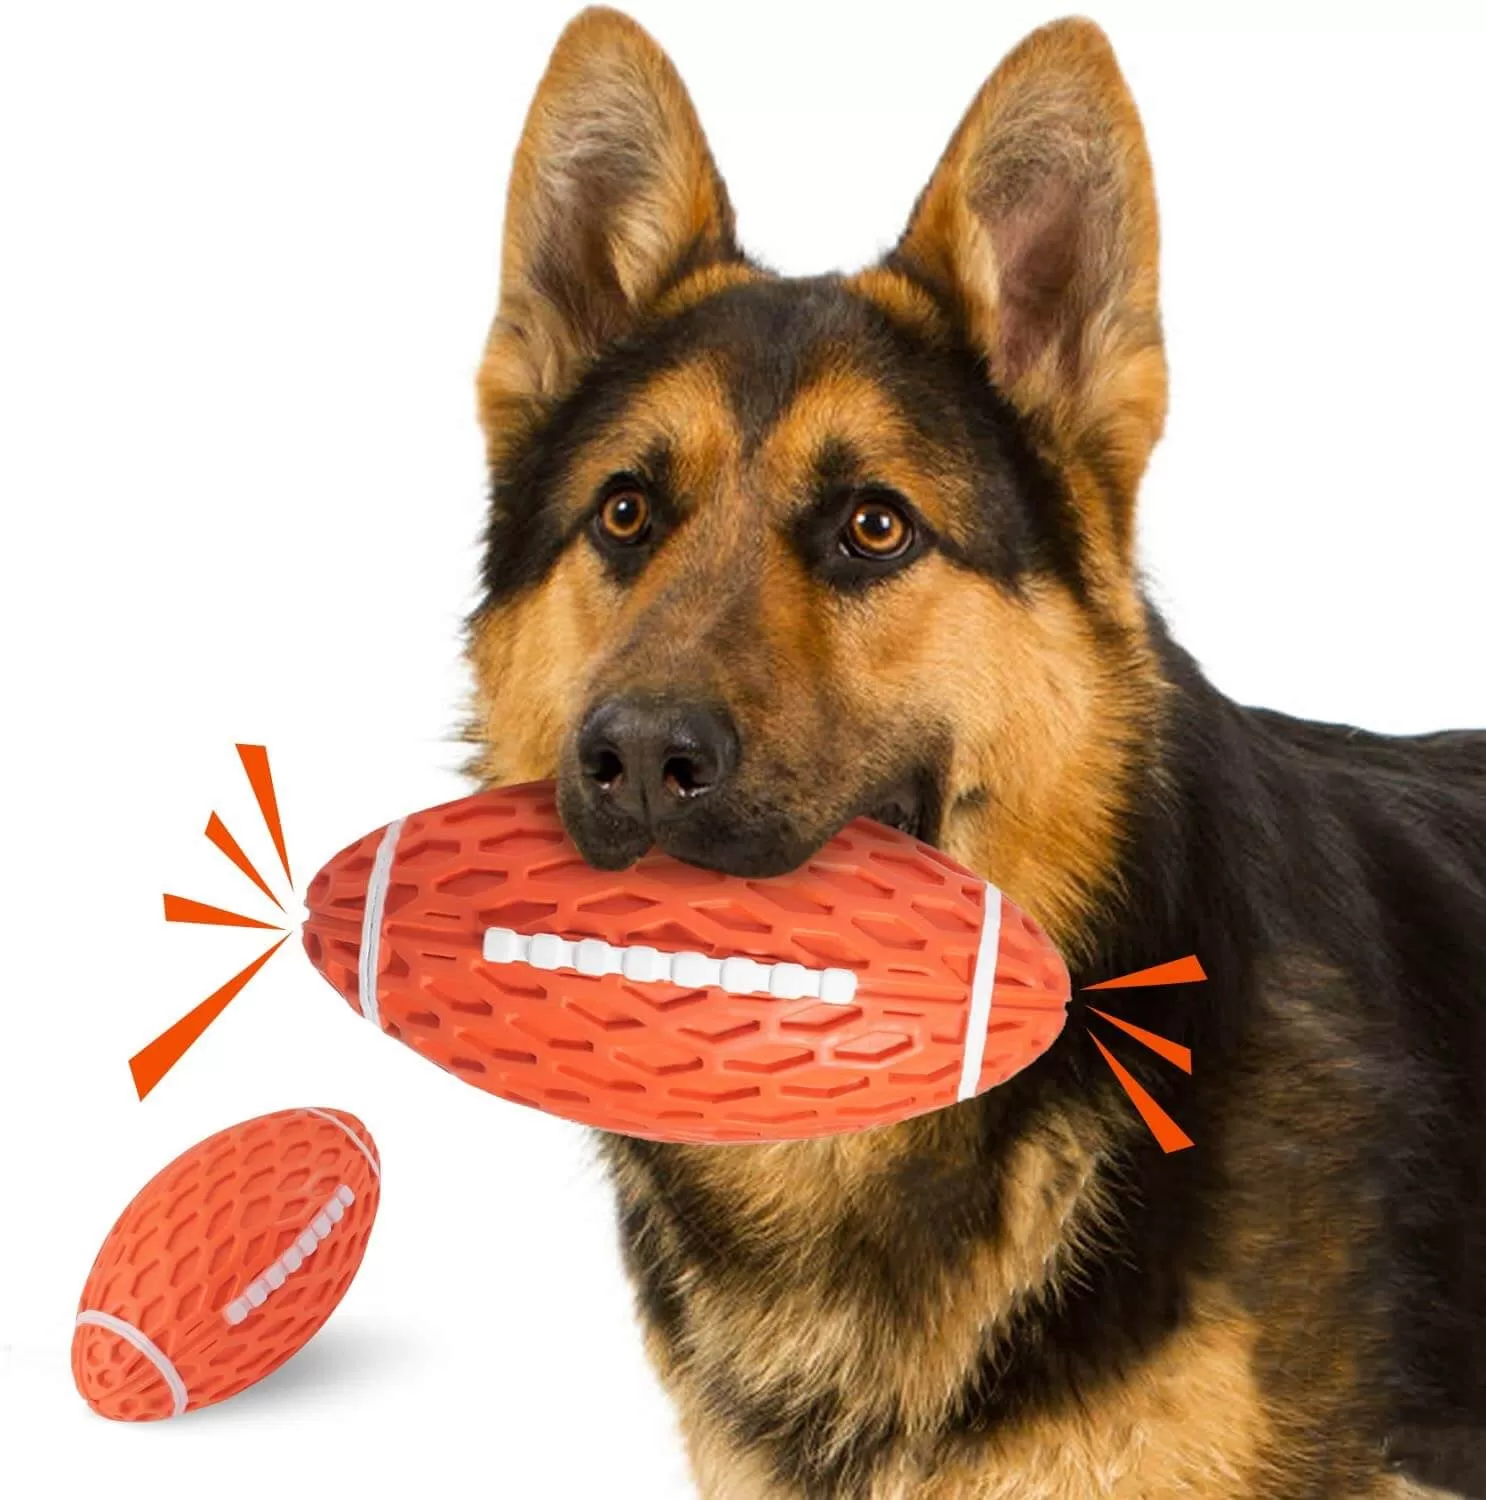 https://www.youmipets.com/wp-content/uploads/2023/03/Dog-Chew-Squeaky-Toy-Ball-1-jpg.webp